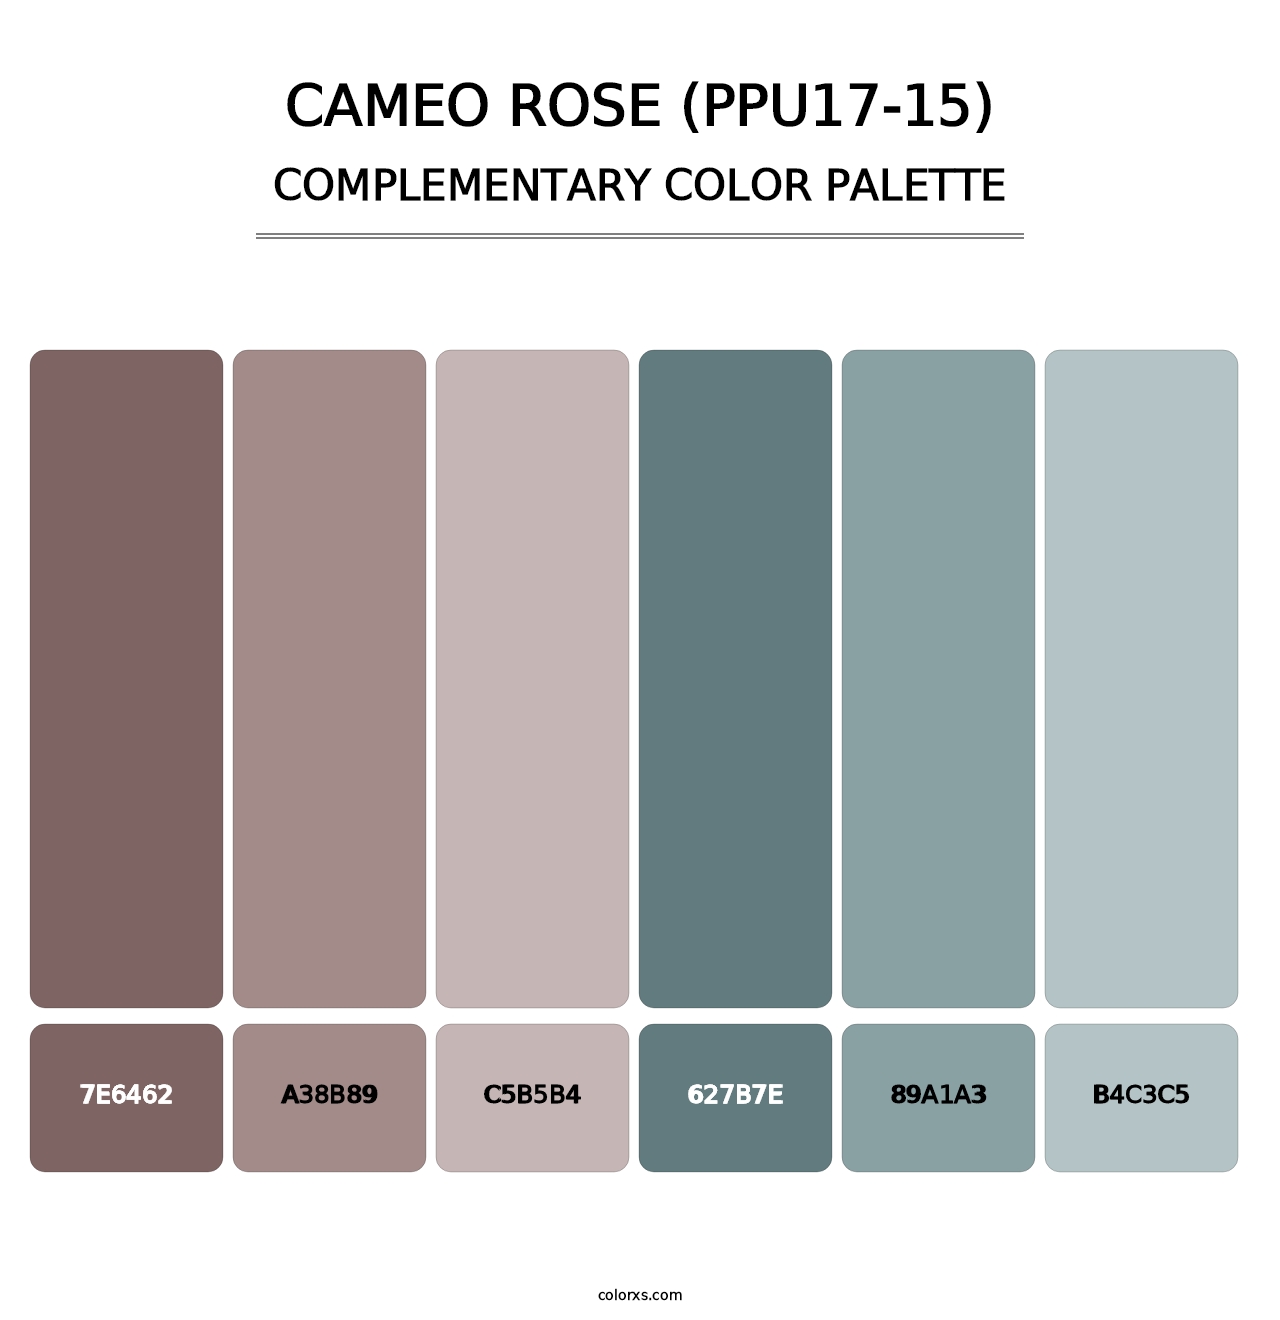 Cameo Rose (PPU17-15) - Complementary Color Palette